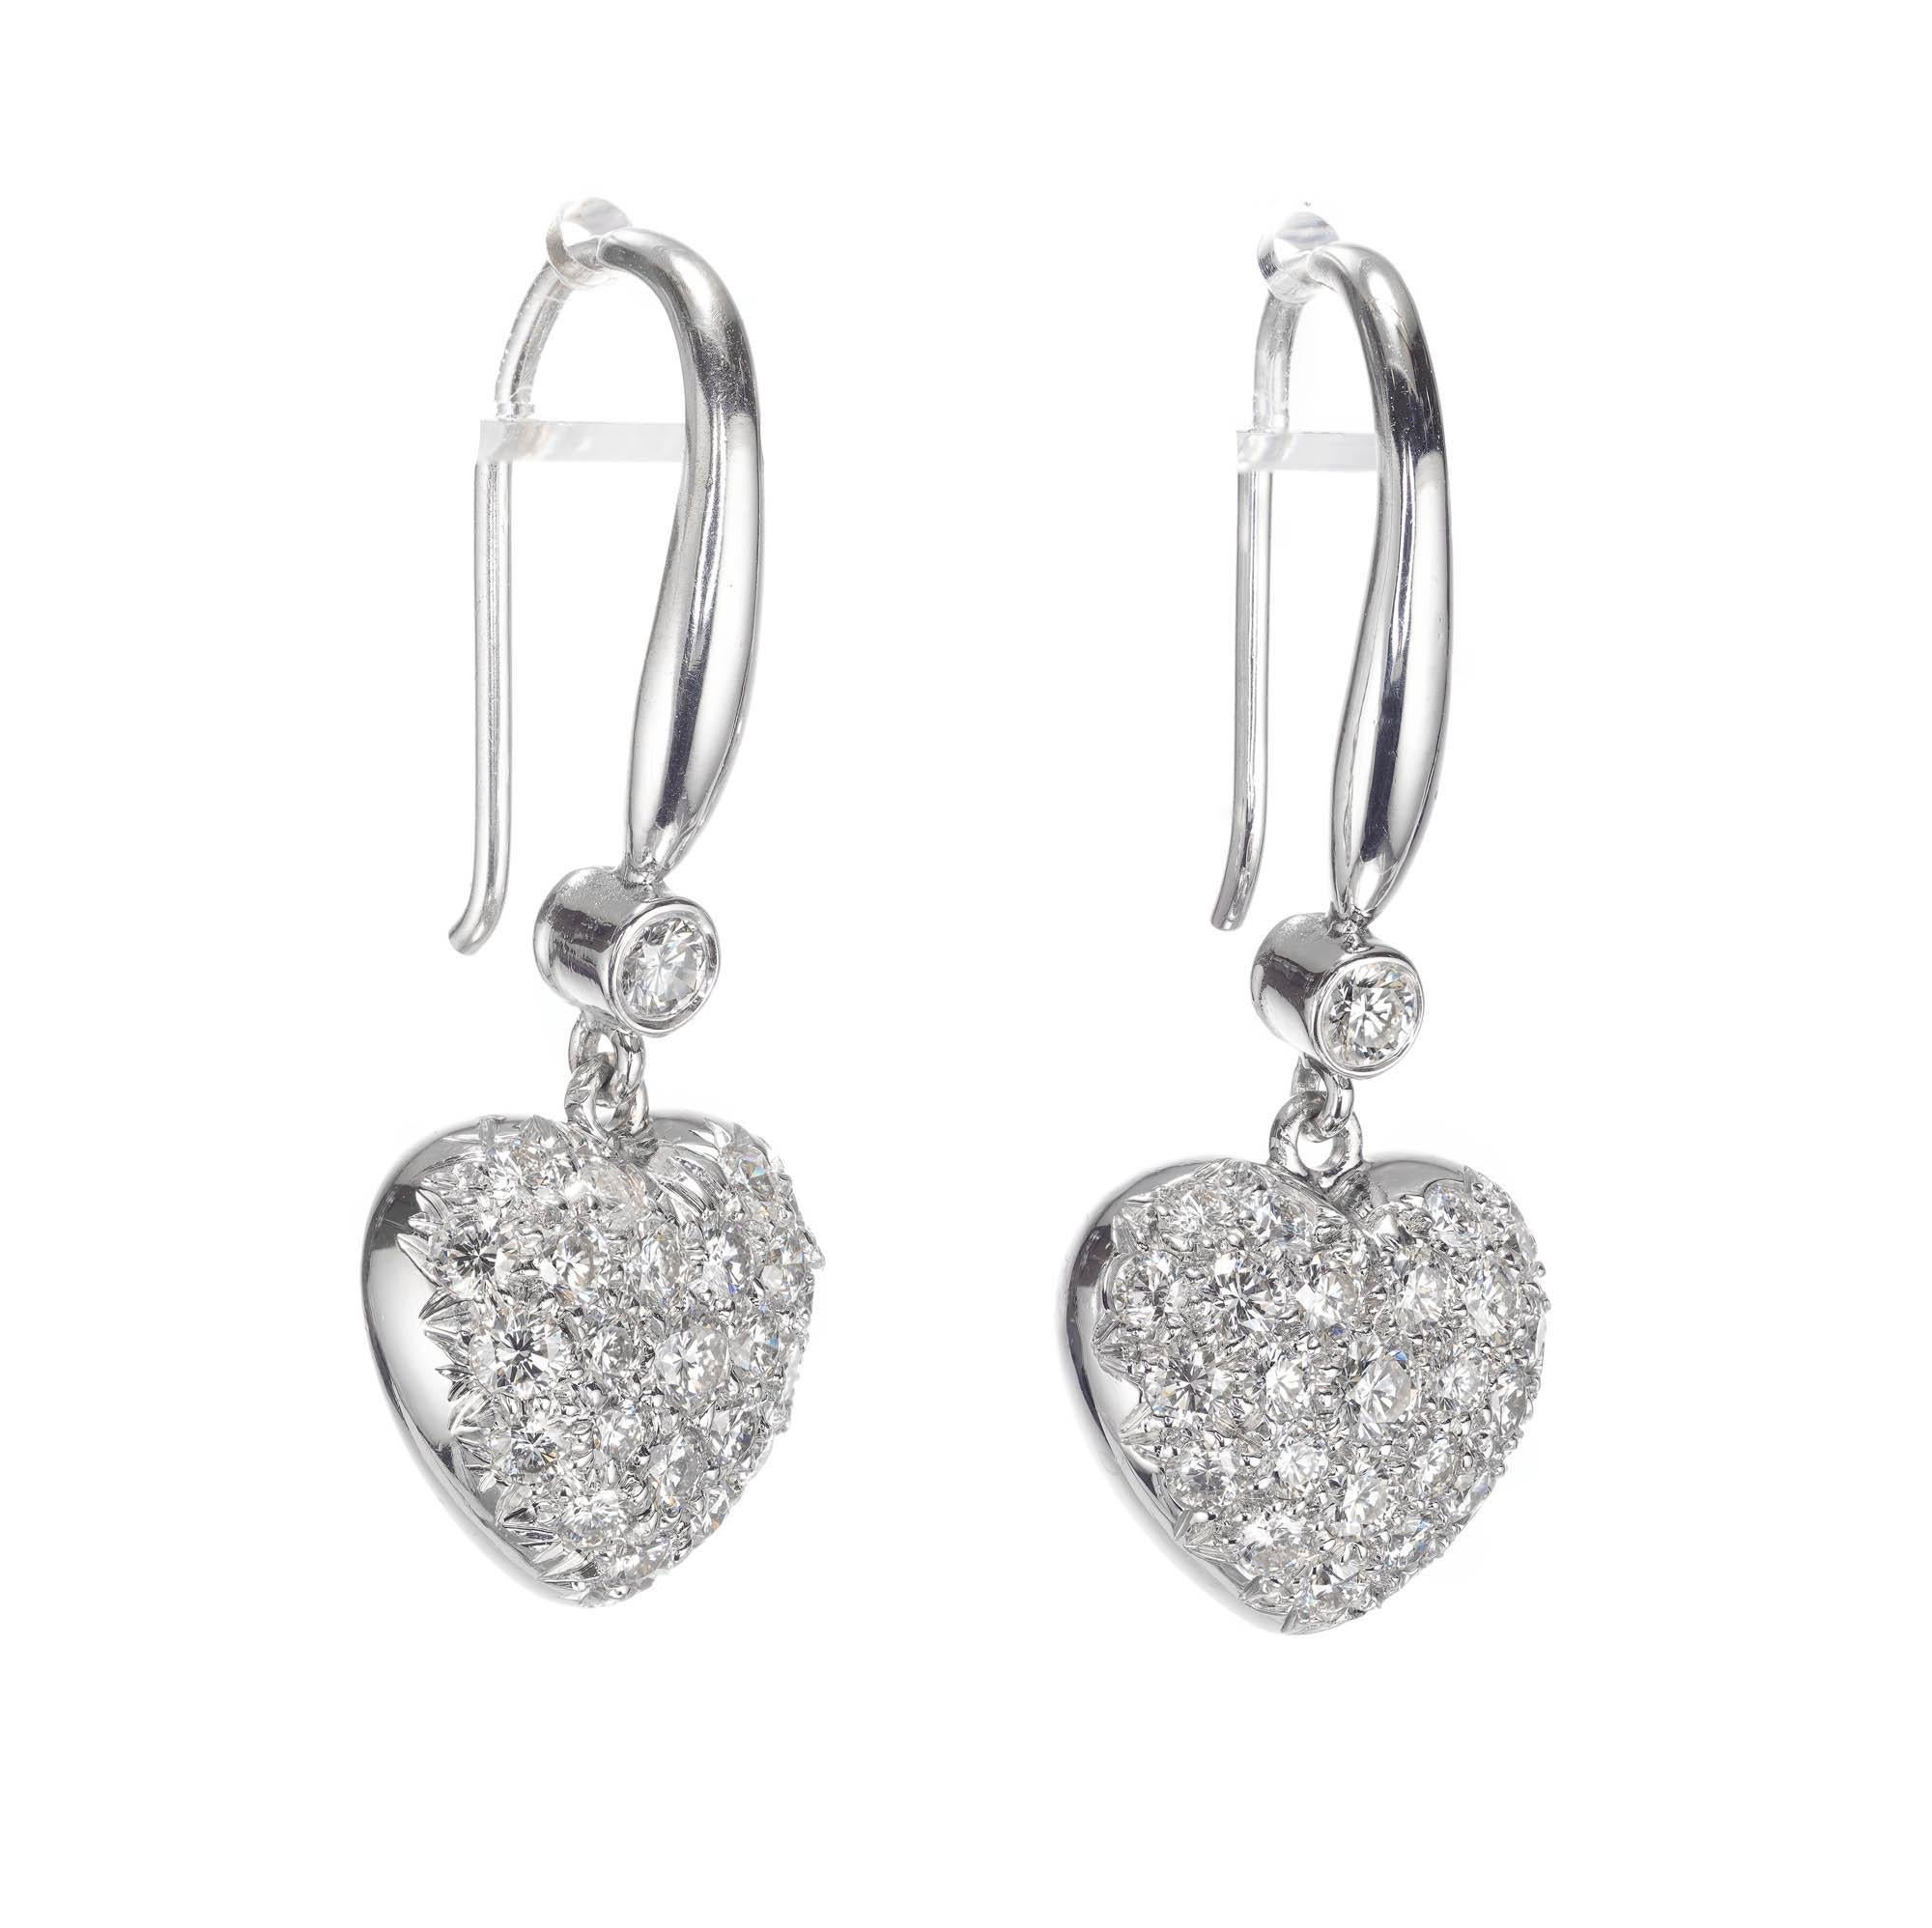 Pave diamond heart dangle earrings in 18k white gold 

48 round brilliant cut H-I SI diamonds, Approximate 1.20 carats 
2 round brilliant cut H-I SI diamonds, Approximate .14 carats 
18k White Gold 
Stamped: 18k
6.7 Grams
Top to Bottom: 30mm or 1 ¼